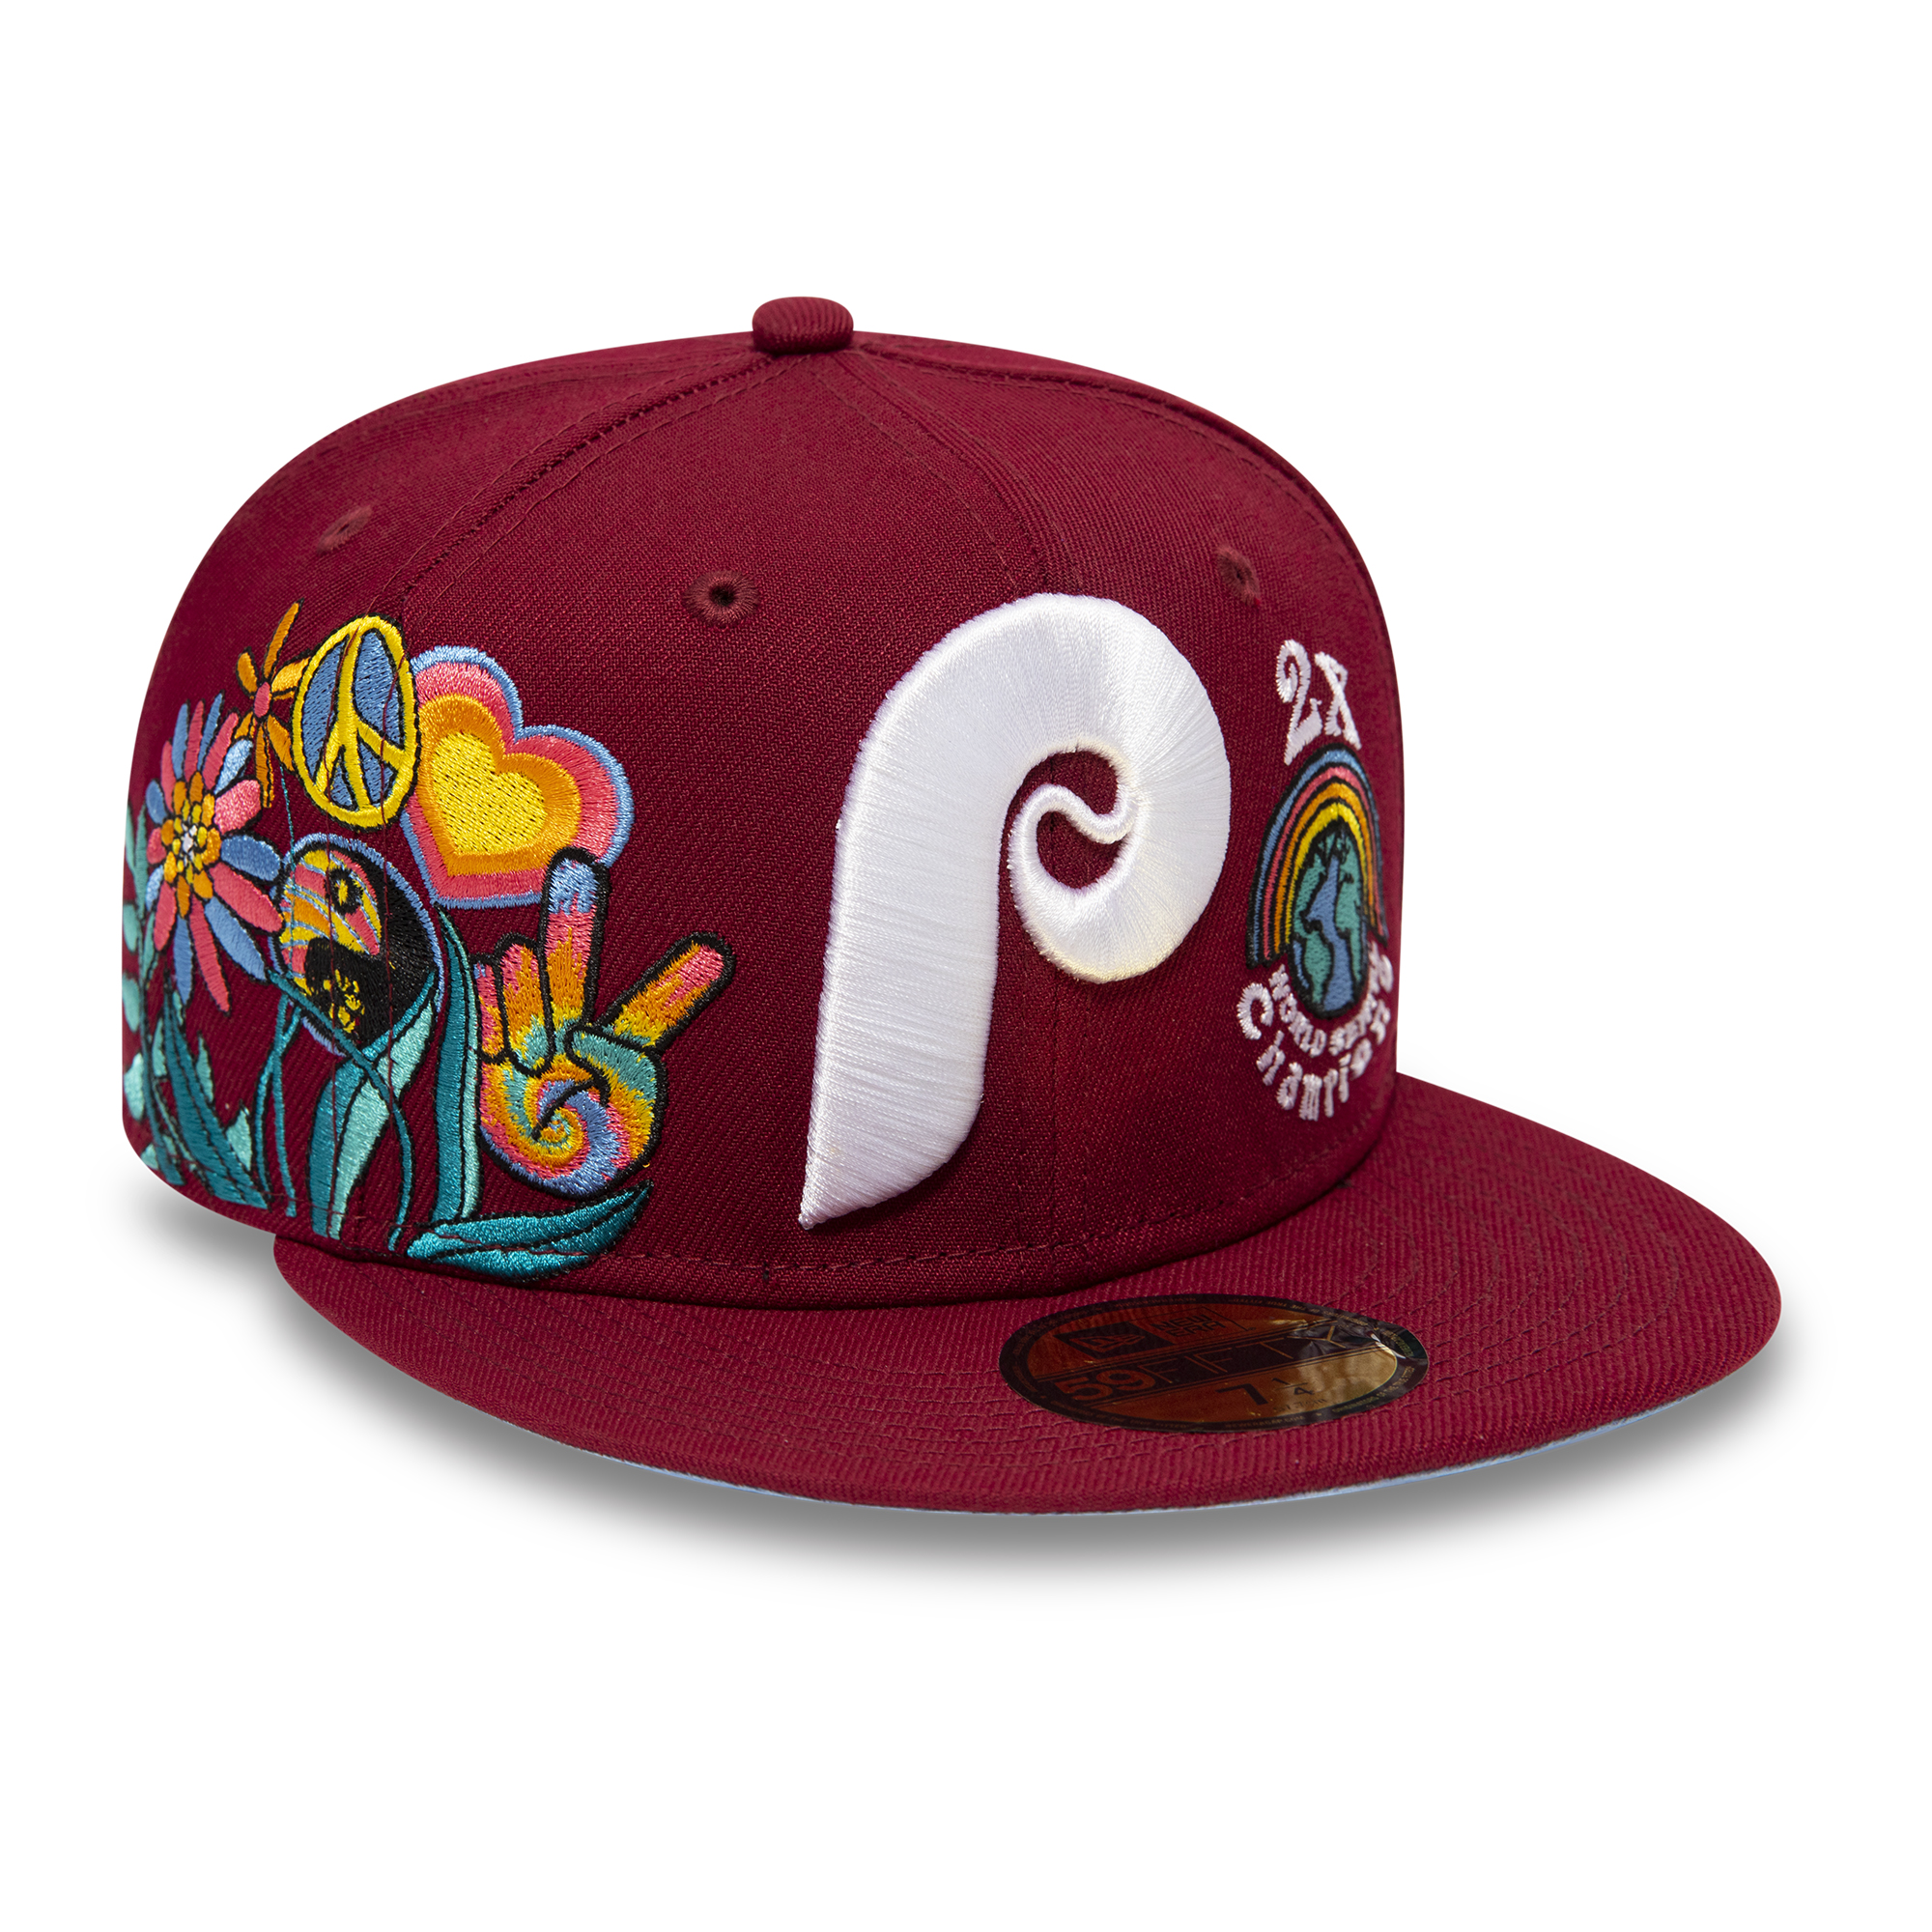 Official New Era Philadelphia Phillies MLB Groovy Scarlet 59FIFTY Fitted Cap  B7284_284 B7284_284